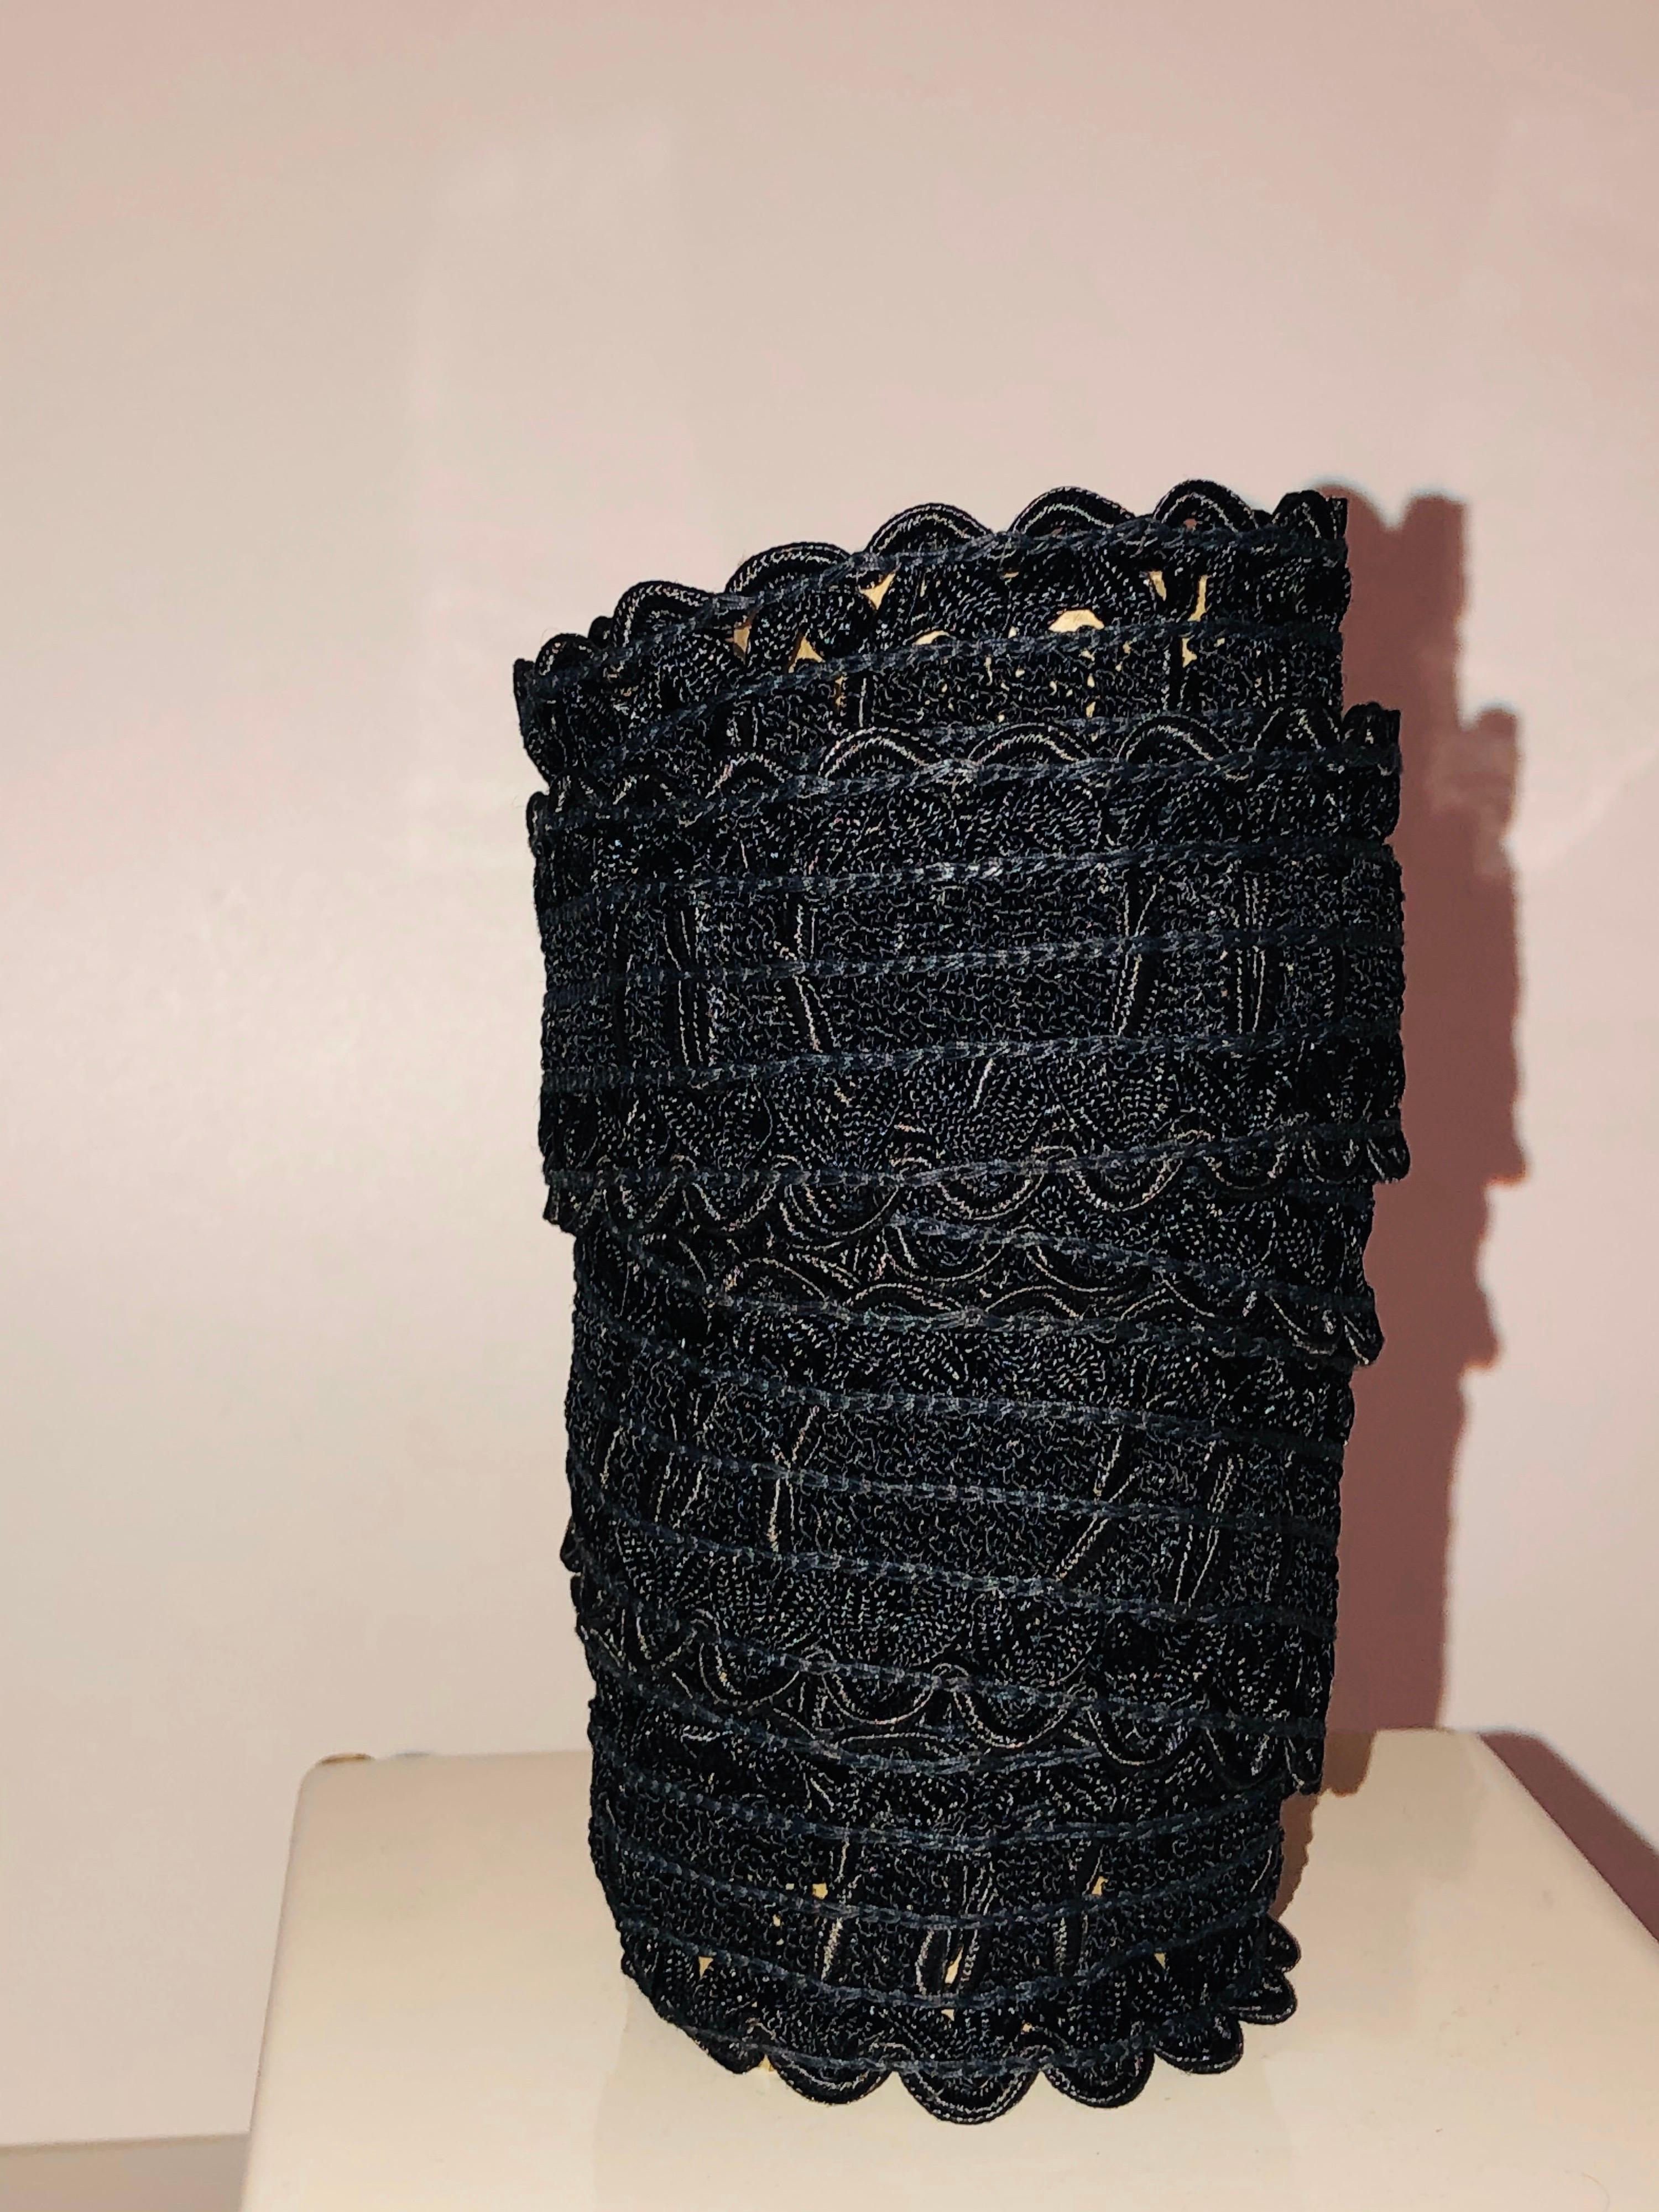 Vintage black woven lace silk trim.
Sold as is.
Ideal for pillows and upholstery.
Size: 2 yards and 20